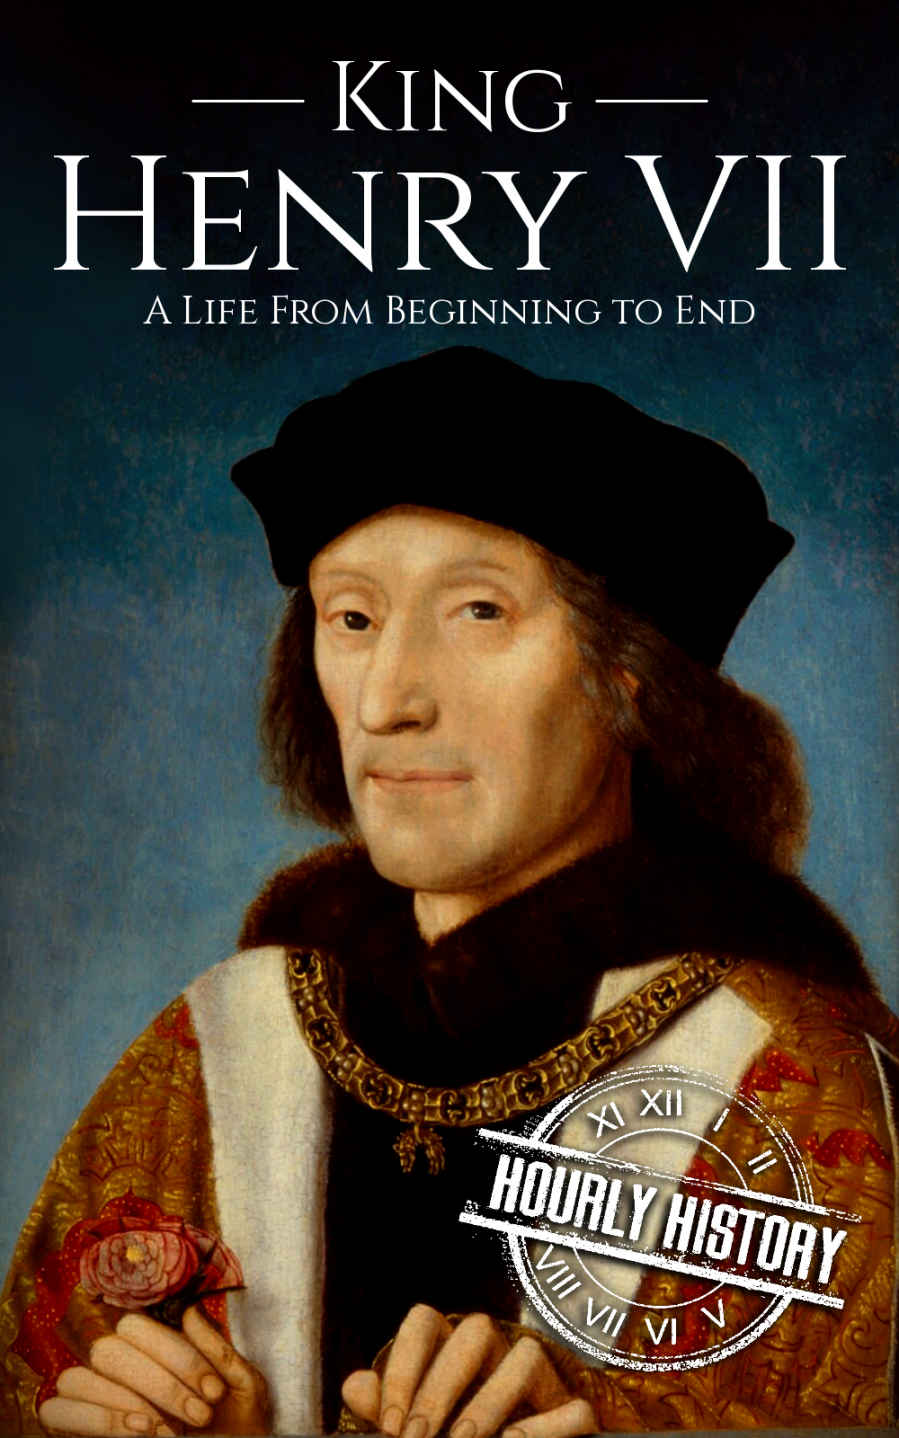 King Henry VII: A Life from Beginning to End (Biographies of British Royalty)